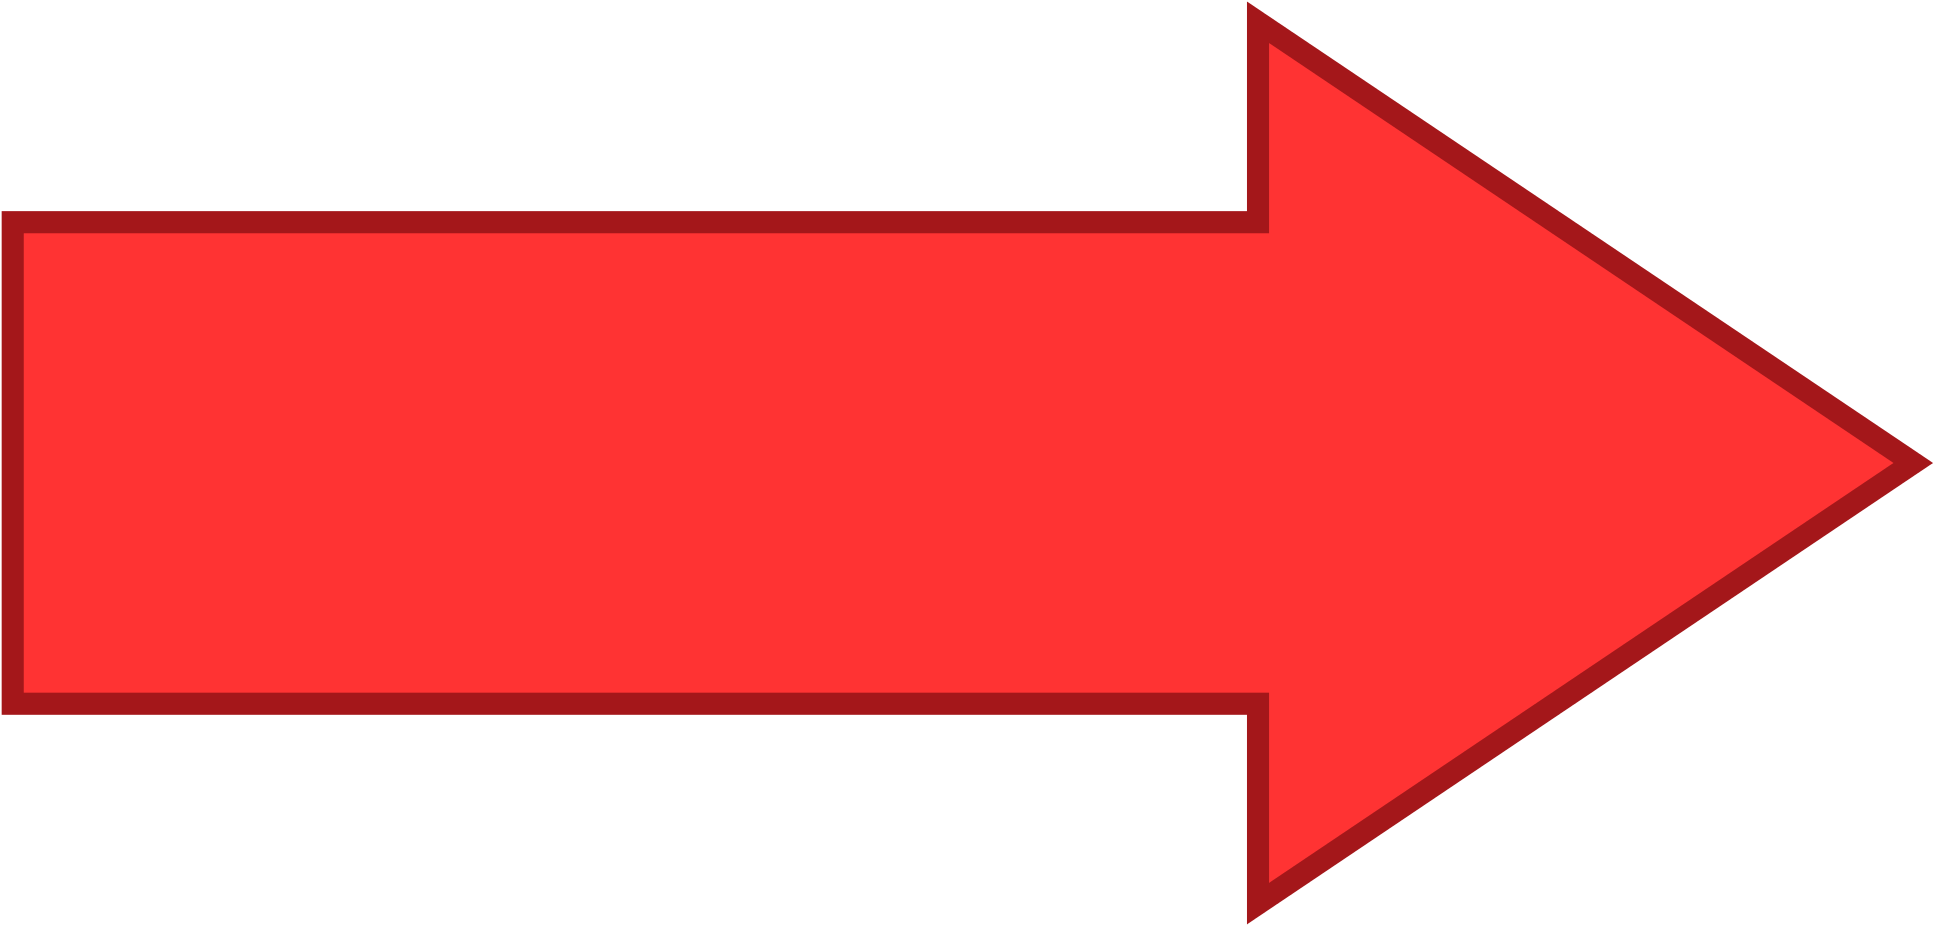 Open - Red Arrow Pointing Right (2000x994)